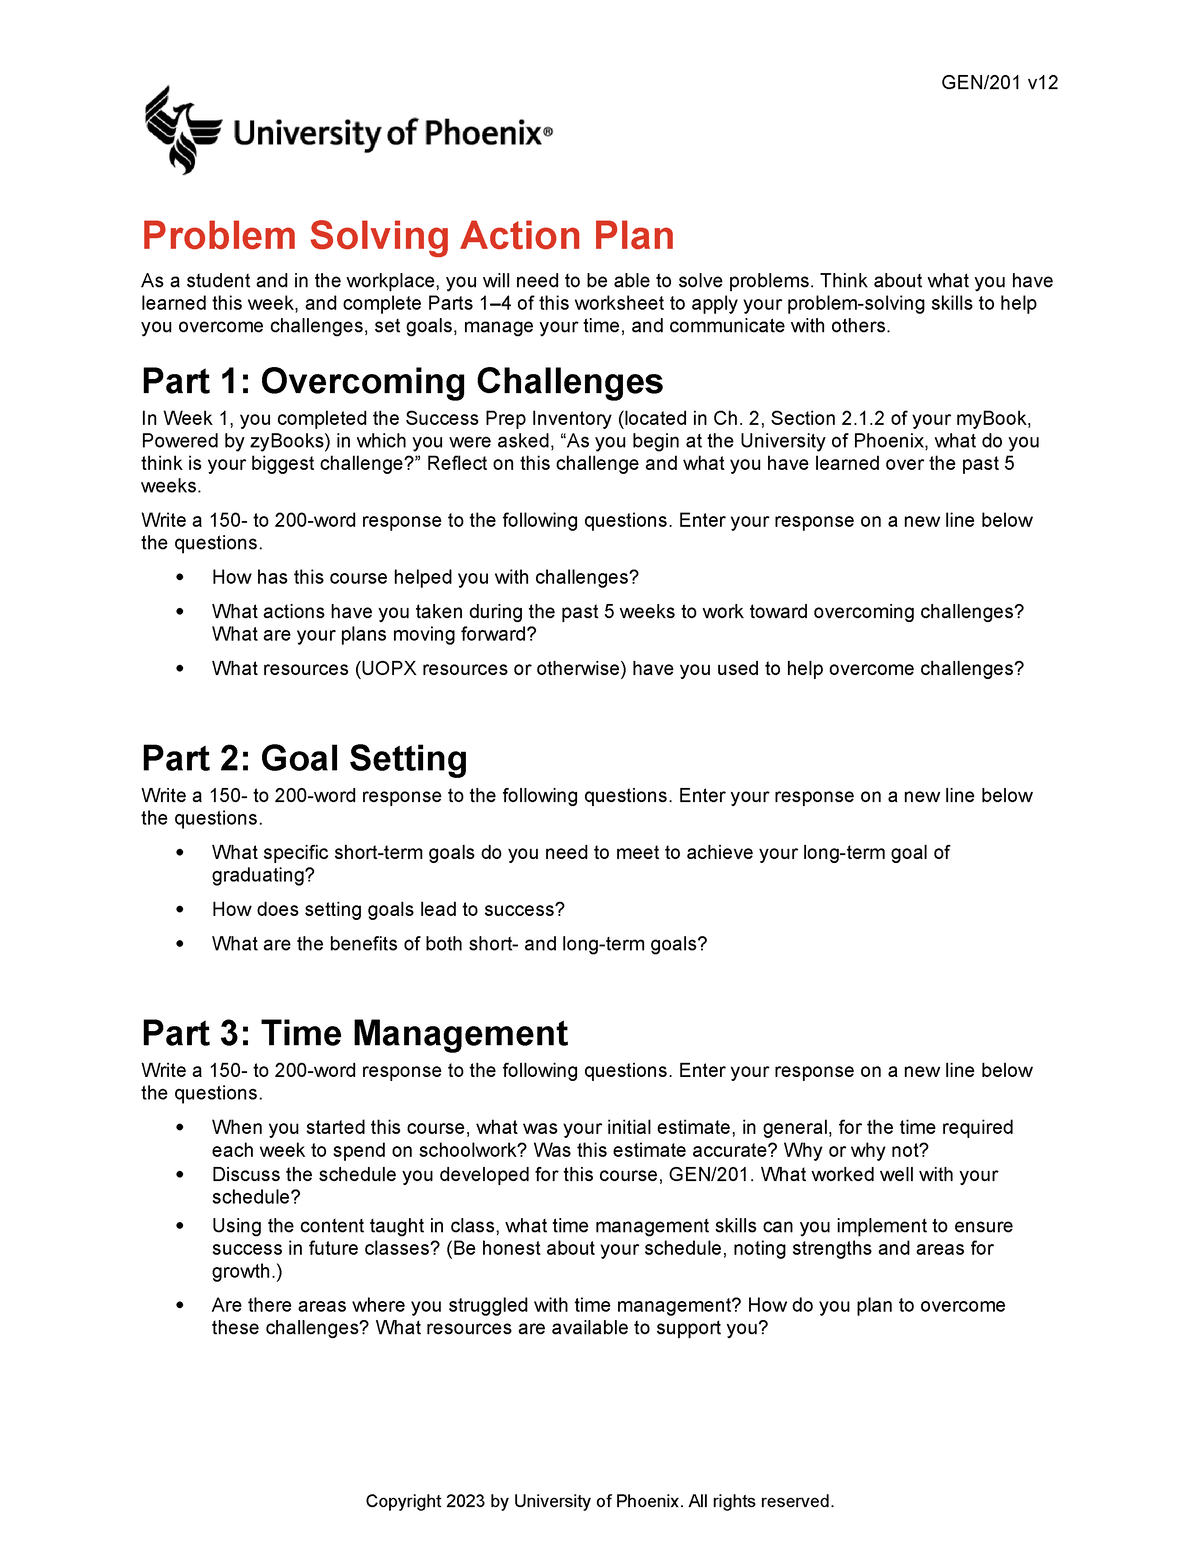 action plan in problem solving